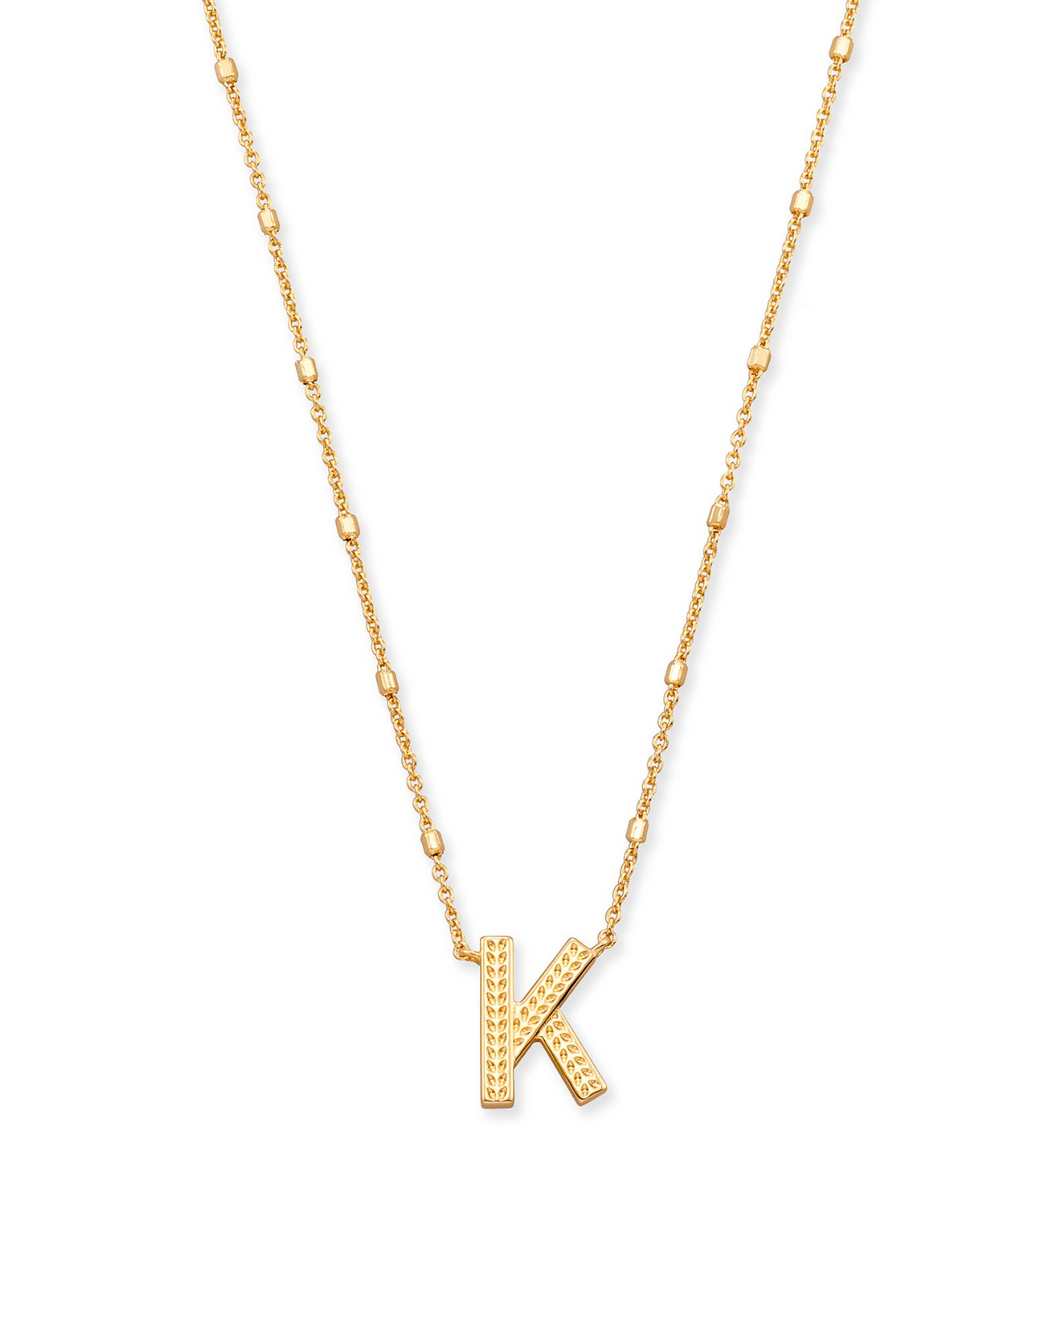 Letter K Pendant Necklace in Gold by Kendra Scott